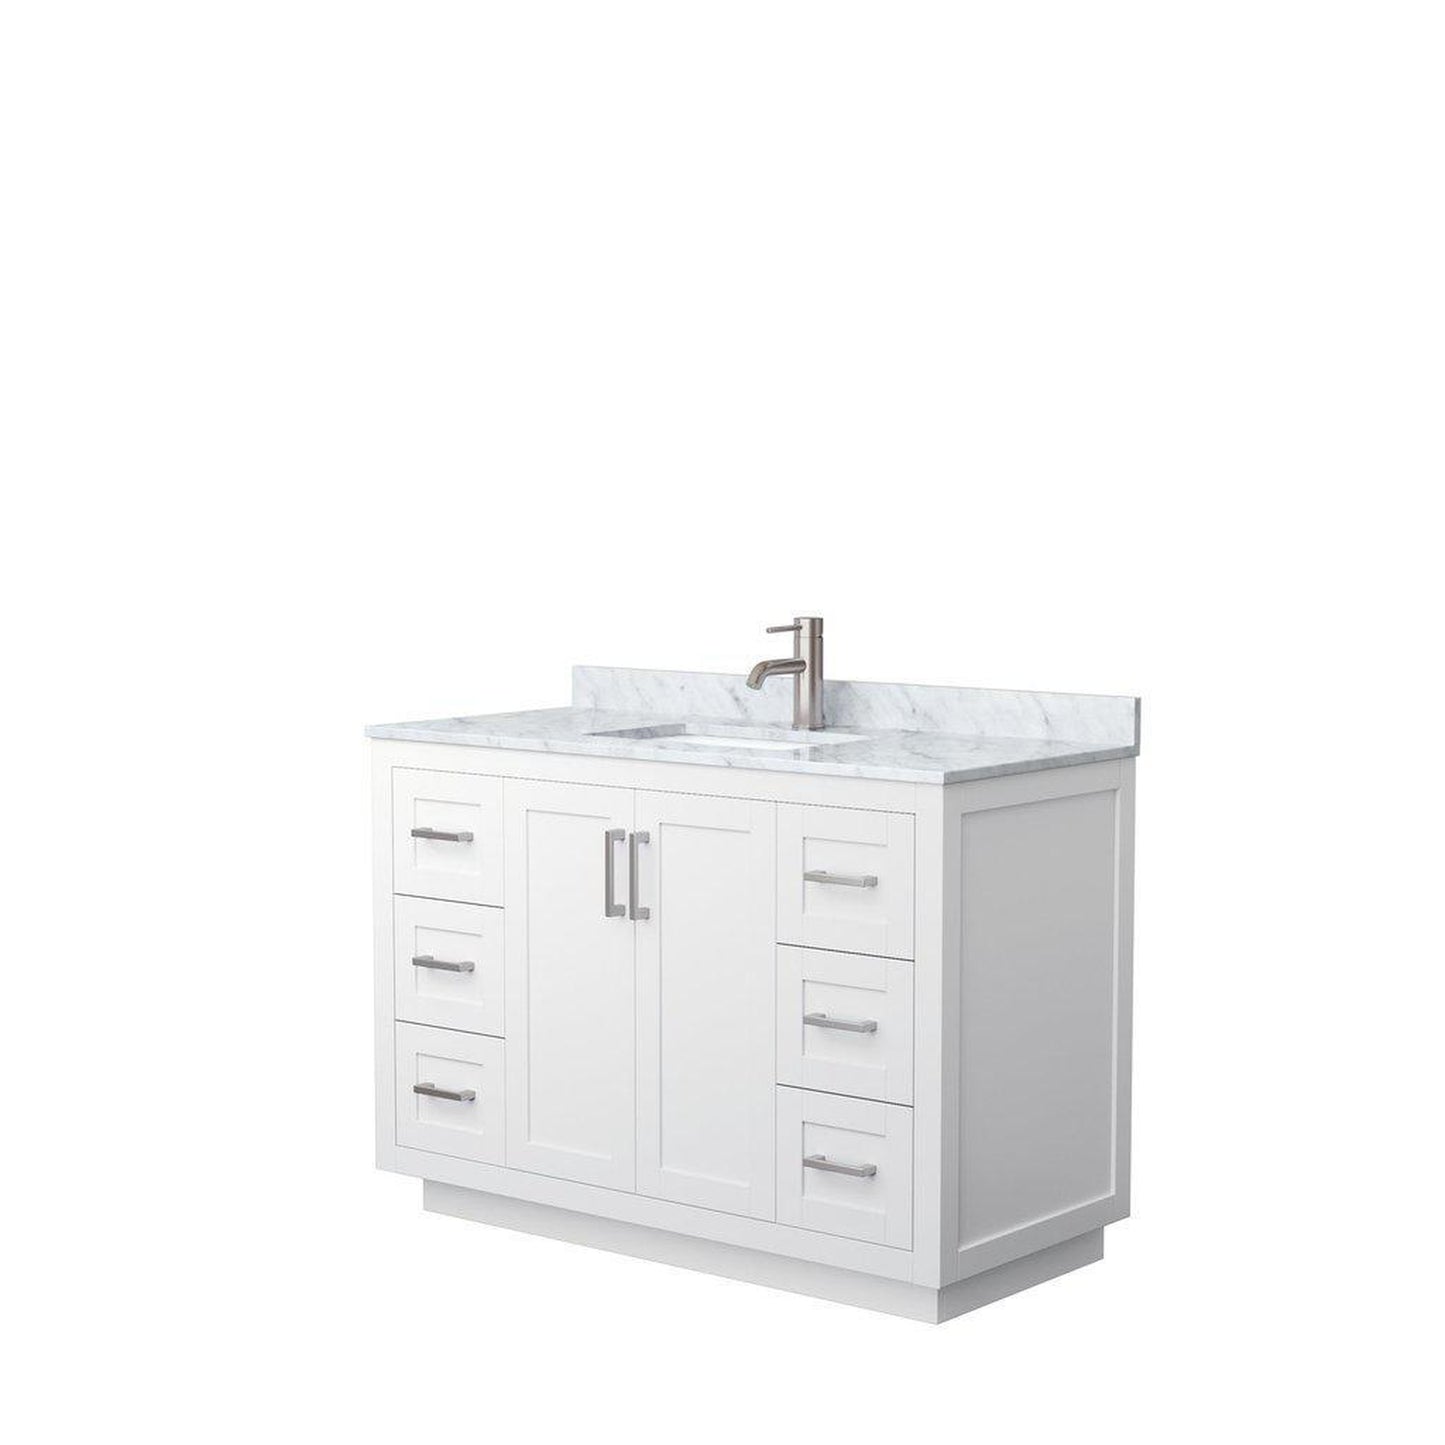 Wyndham Collection Miranda 48" Single Bathroom White Vanity Set With White Carrara Marble Countertop, Undermount Square Sink, And Brushed Nickel Trim